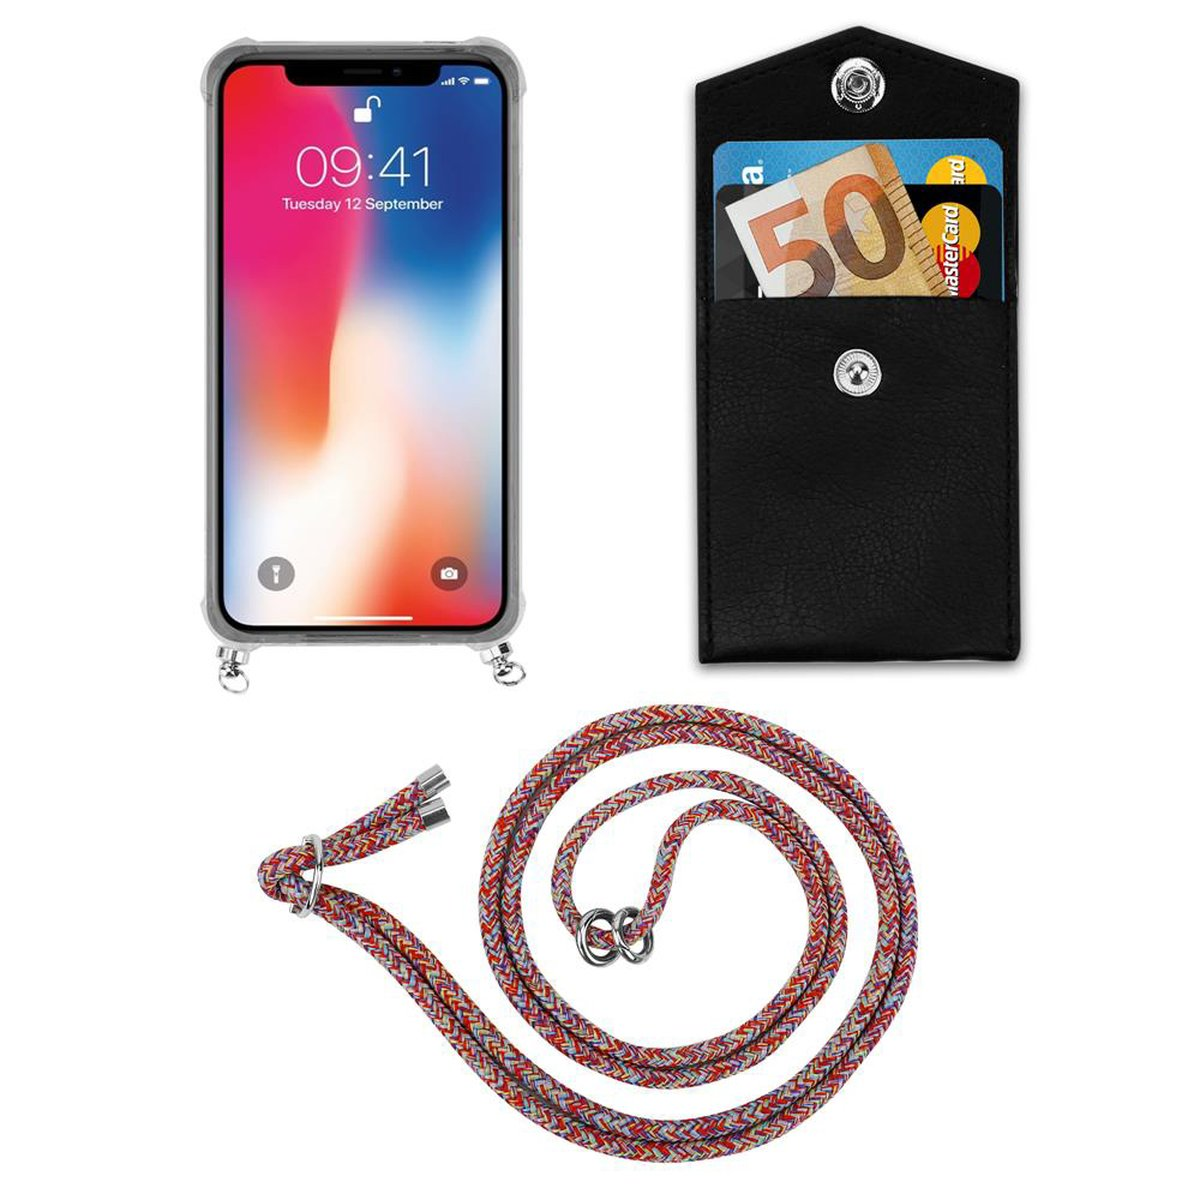 mit COLORFUL Ringen, Apple, Kette XS, Backcover, Silber Band X und Kordel iPhone abnehmbarer PARROT Hülle, CADORABO Handy /